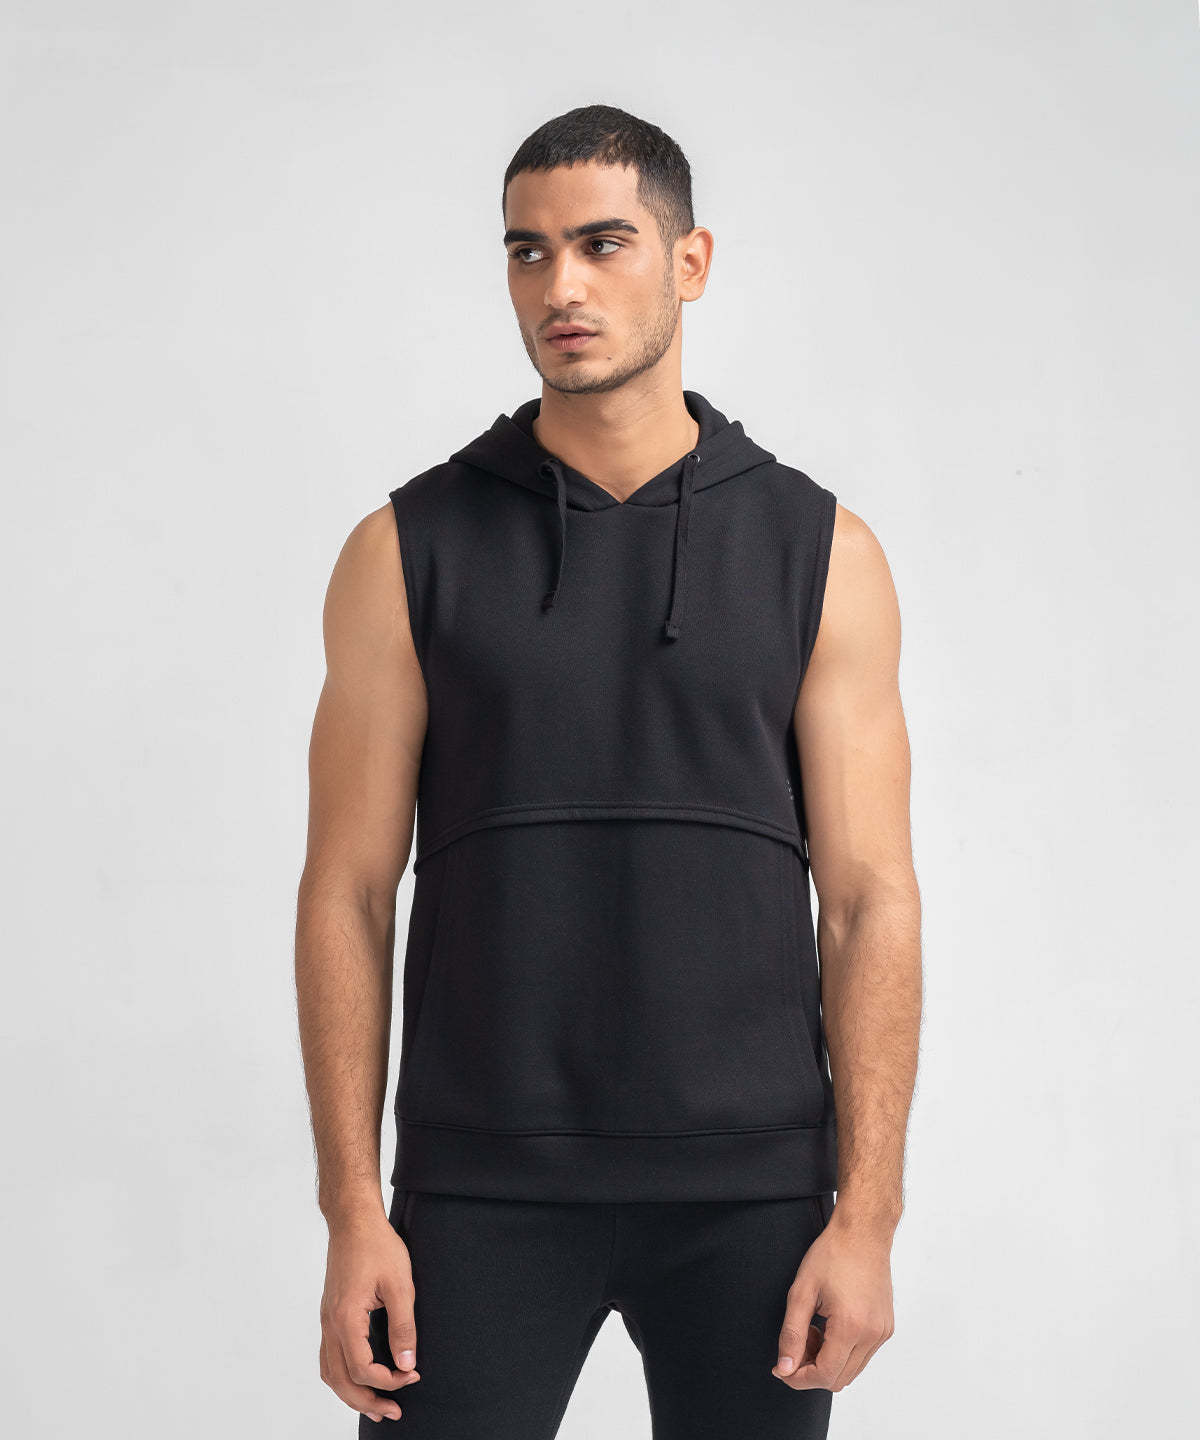 Men Sleeveless With Raw Edge And Contrast Raglan In White Black